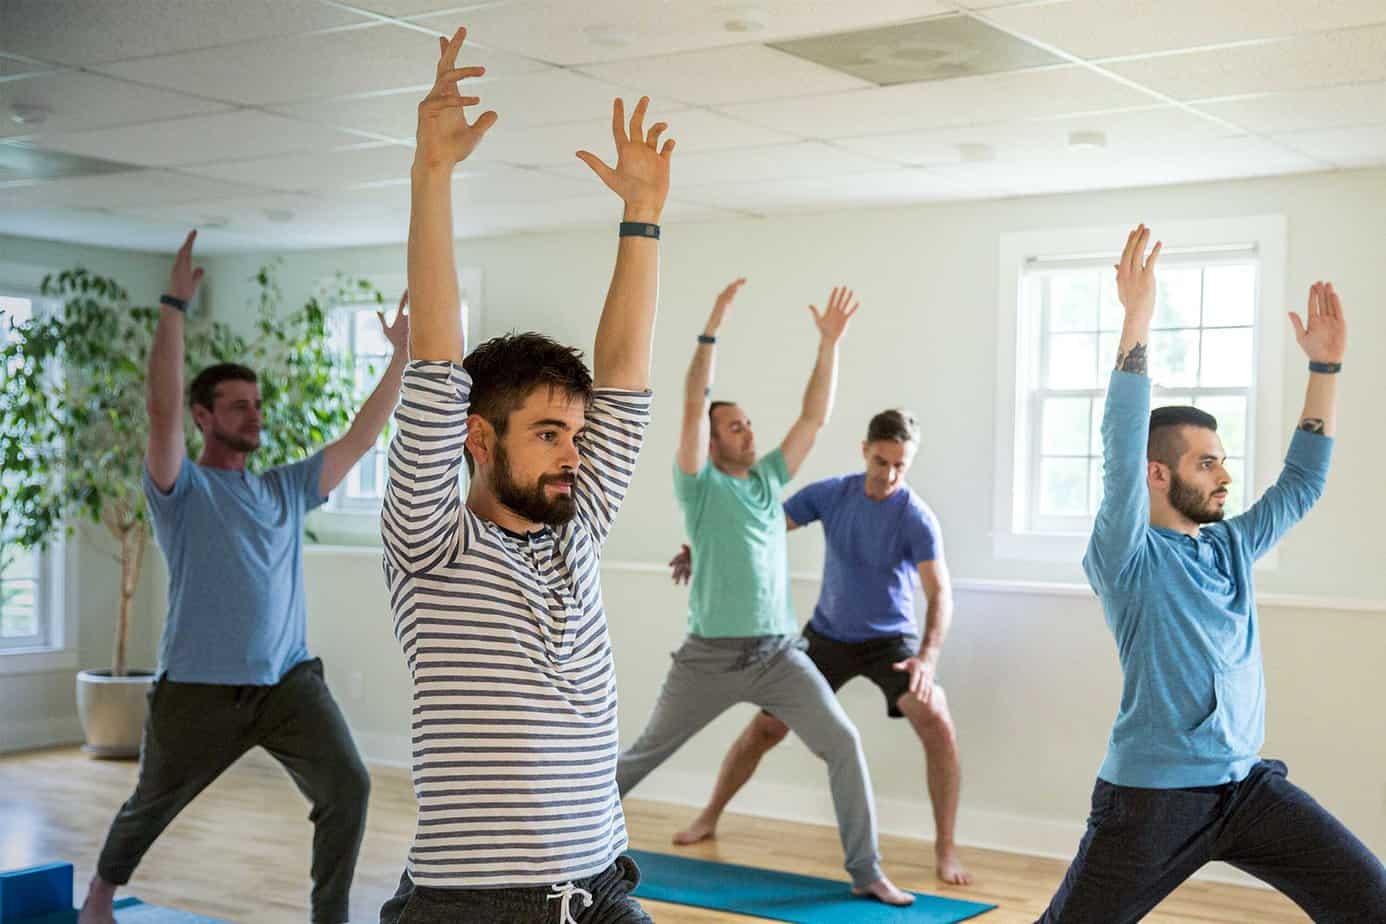 A group of men take a yoga class in bright room at Mountainside